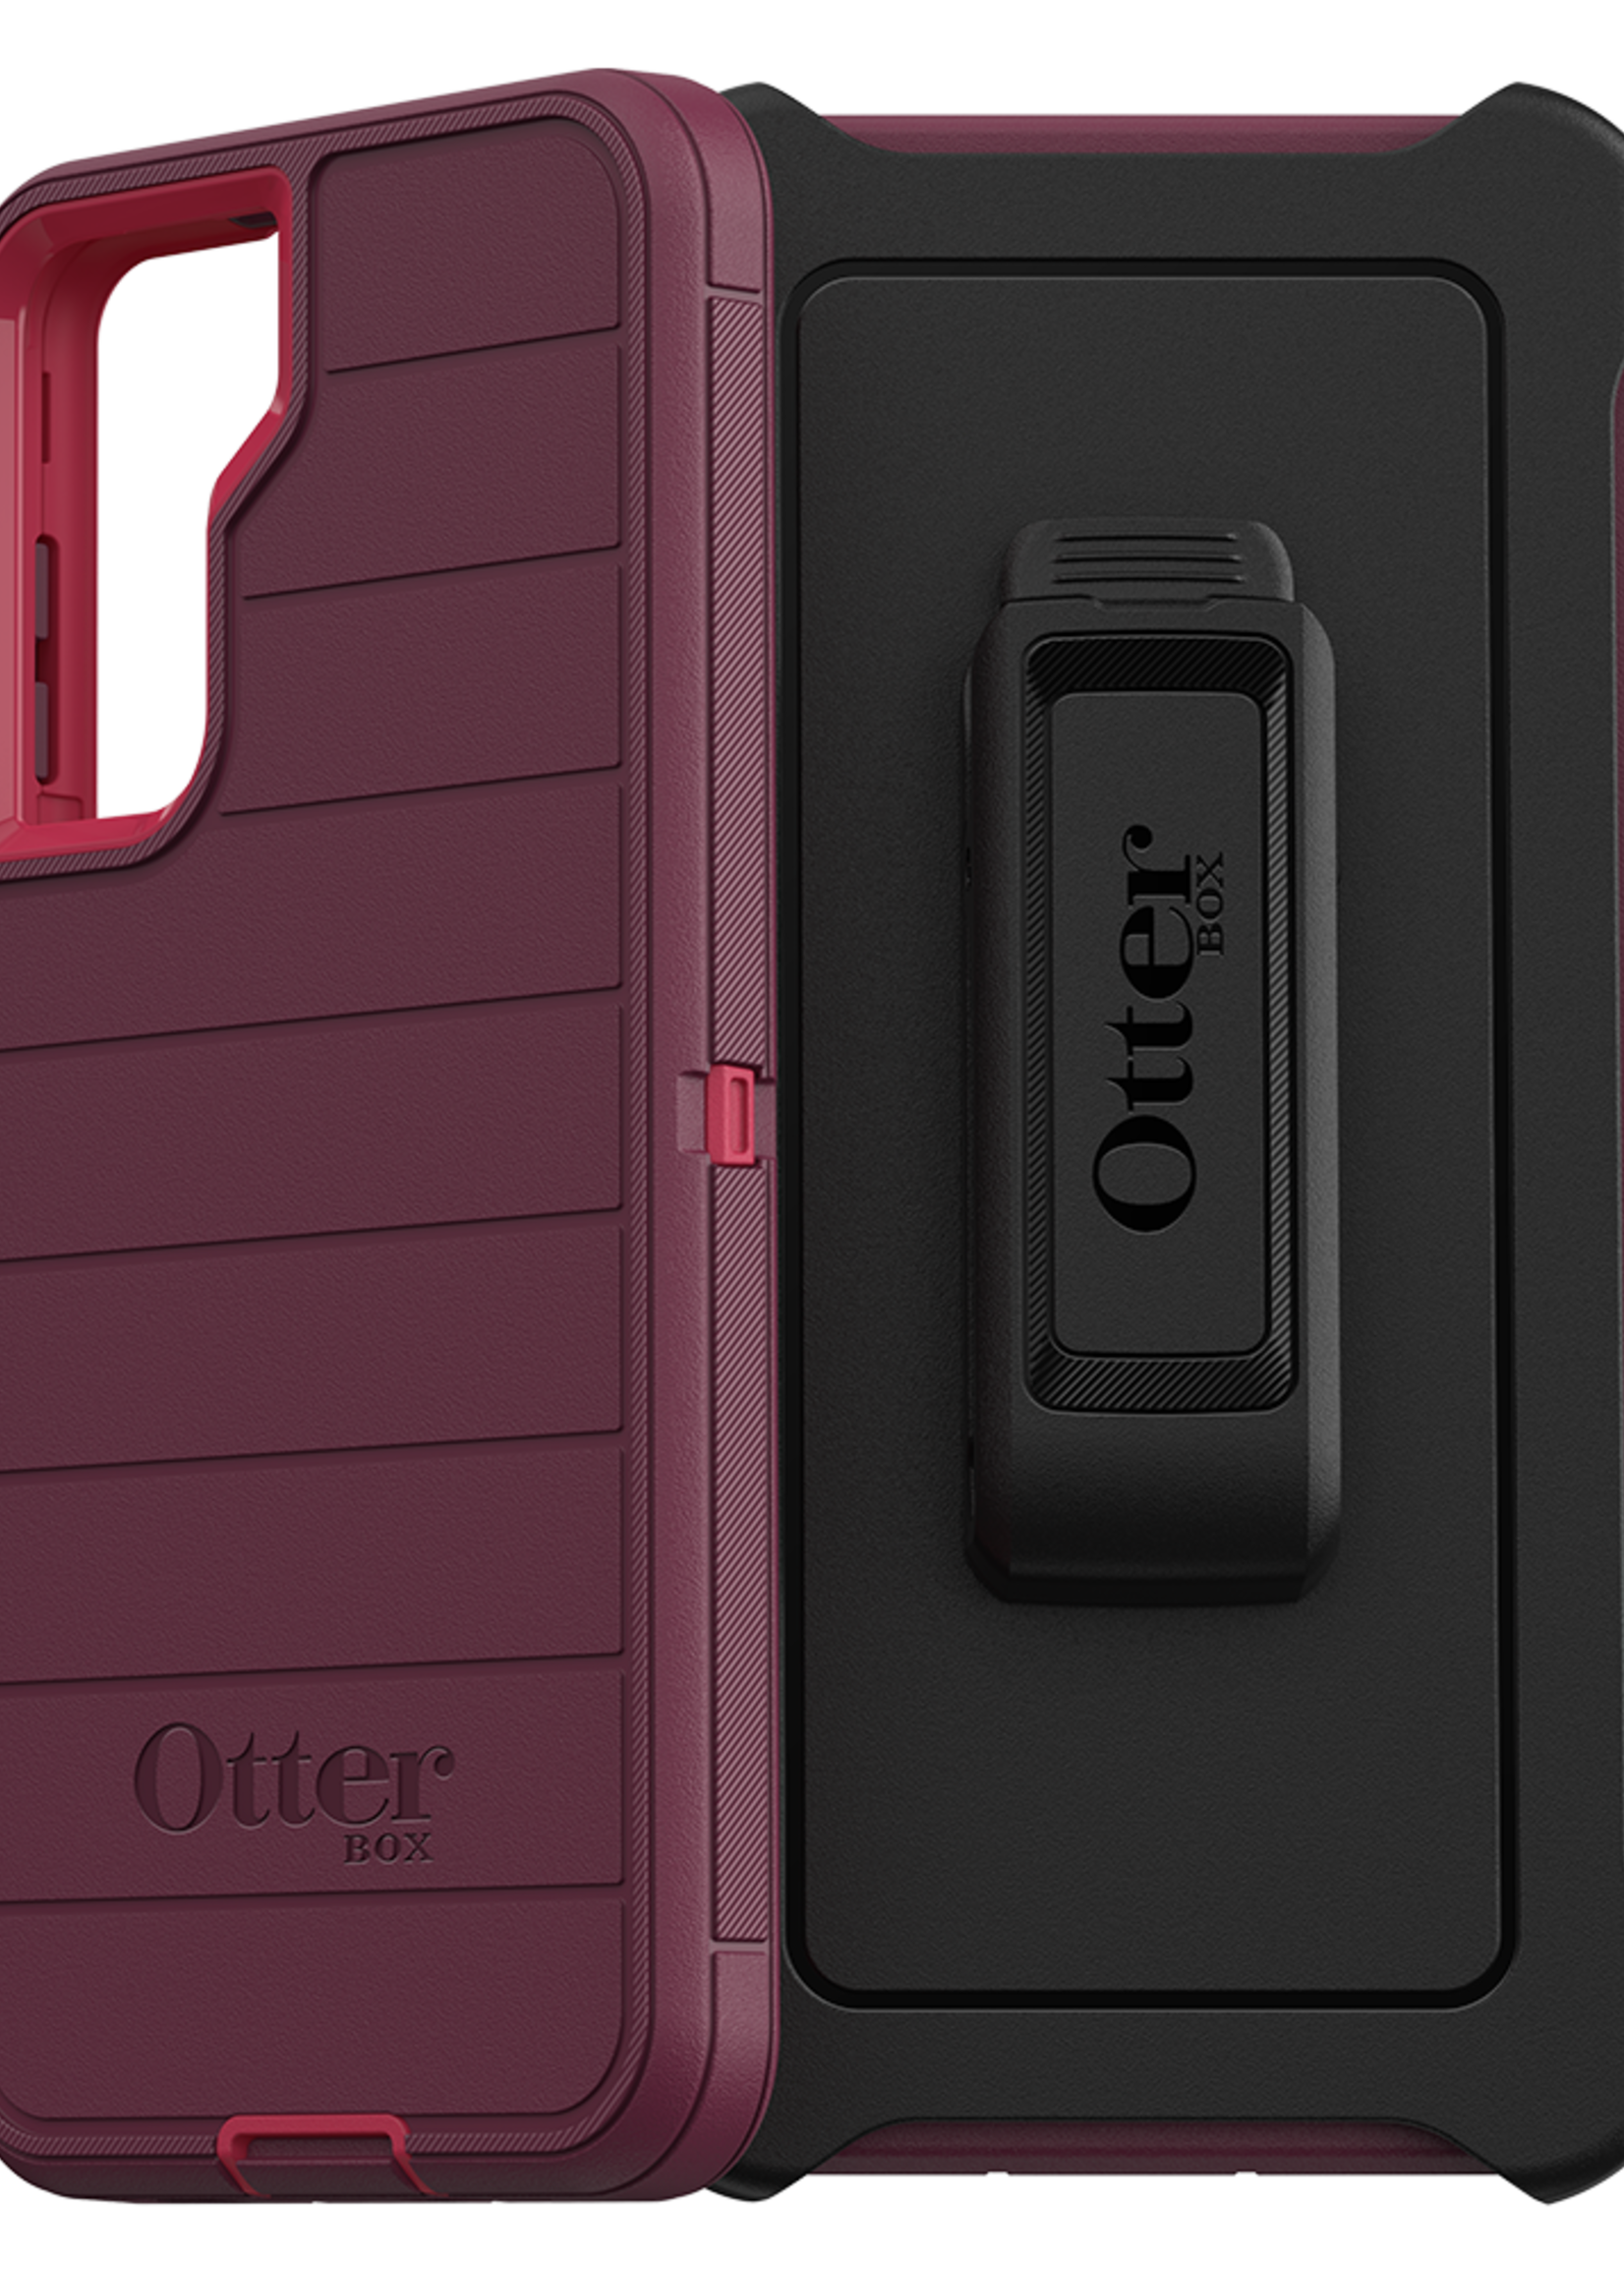 Otterbox OtterBox - Defender Pro Case for Samsung Galaxy S21 5G - Berry Potion